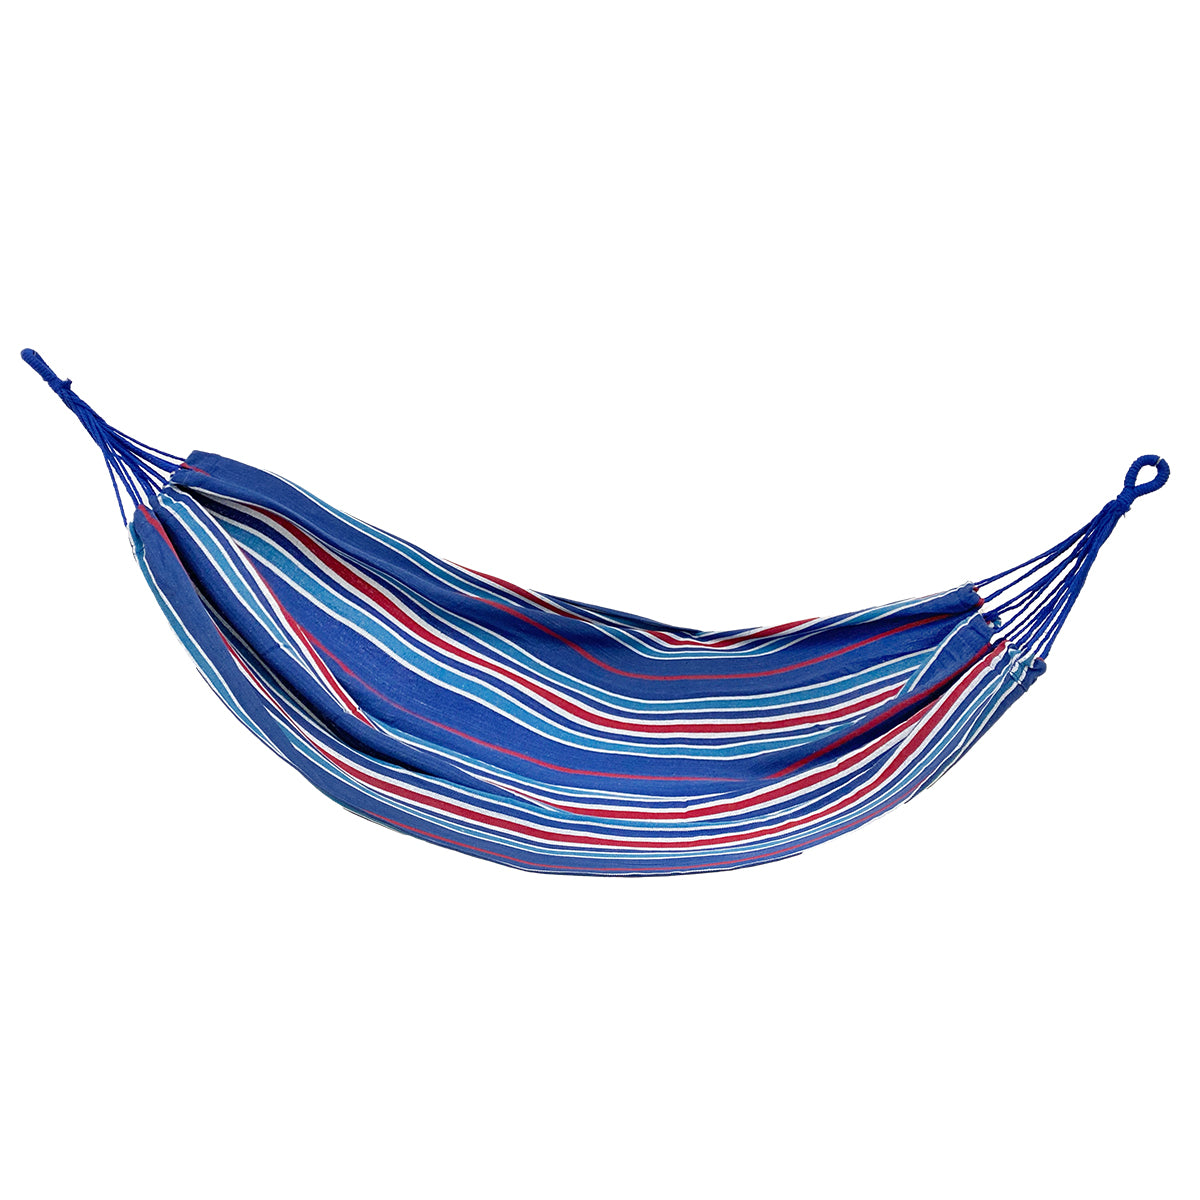 TRAVEL HAMMOCK WITH CANVAS CARRY BAG 200 X 100CM